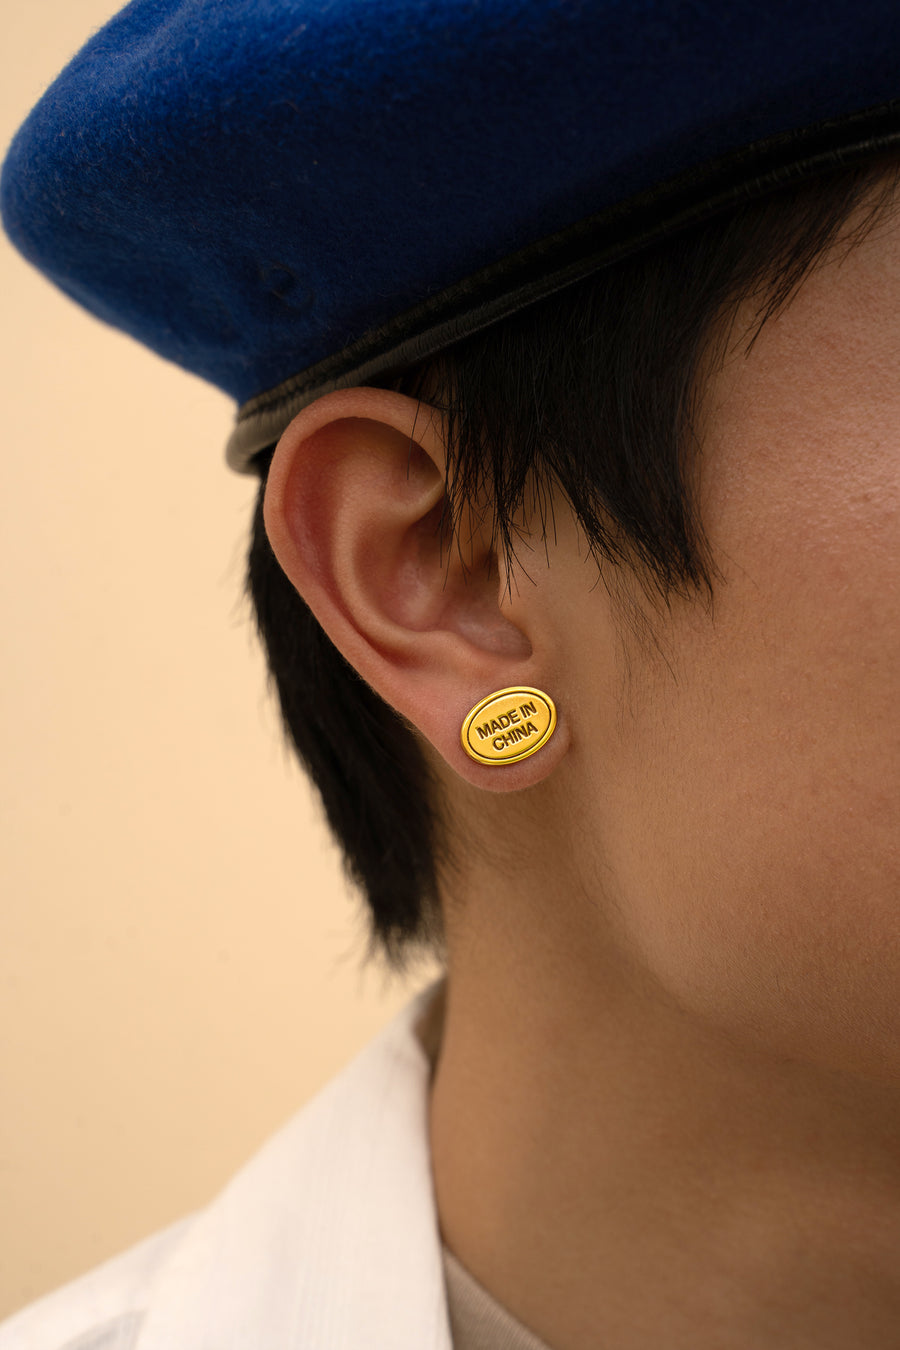 MADE IN CHINA STICKER earring